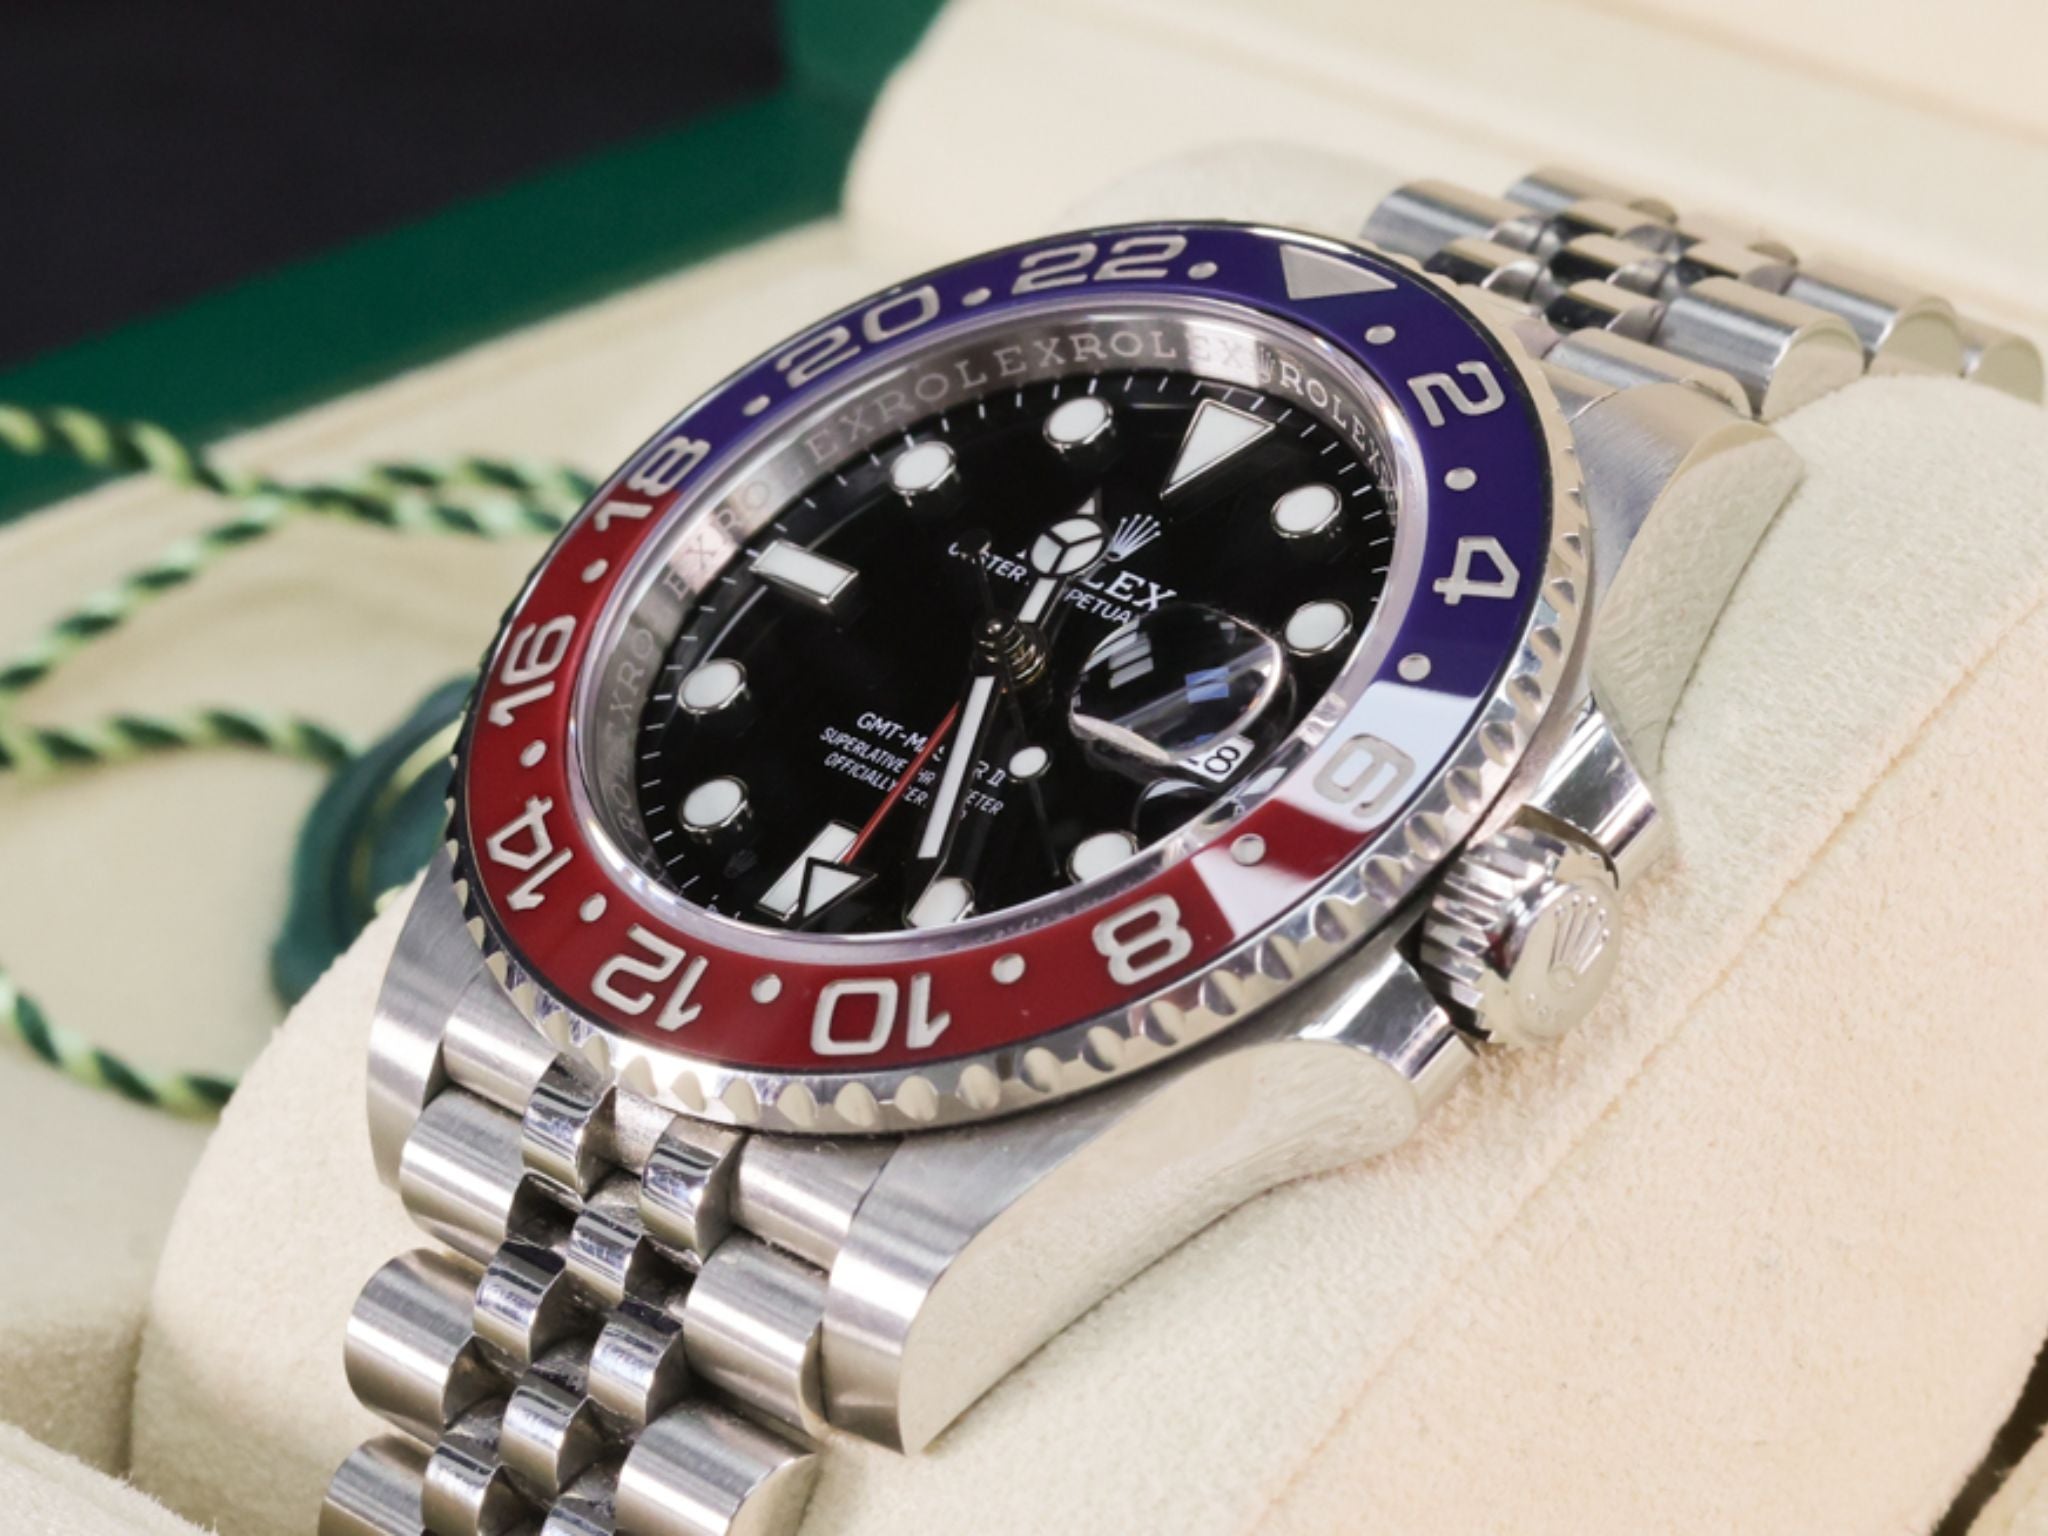 Paul Fraser Collectibles | Rolex GMT-Master II “Pepsi” Oyster Perpetual wristwatch - ref 126710BLRO